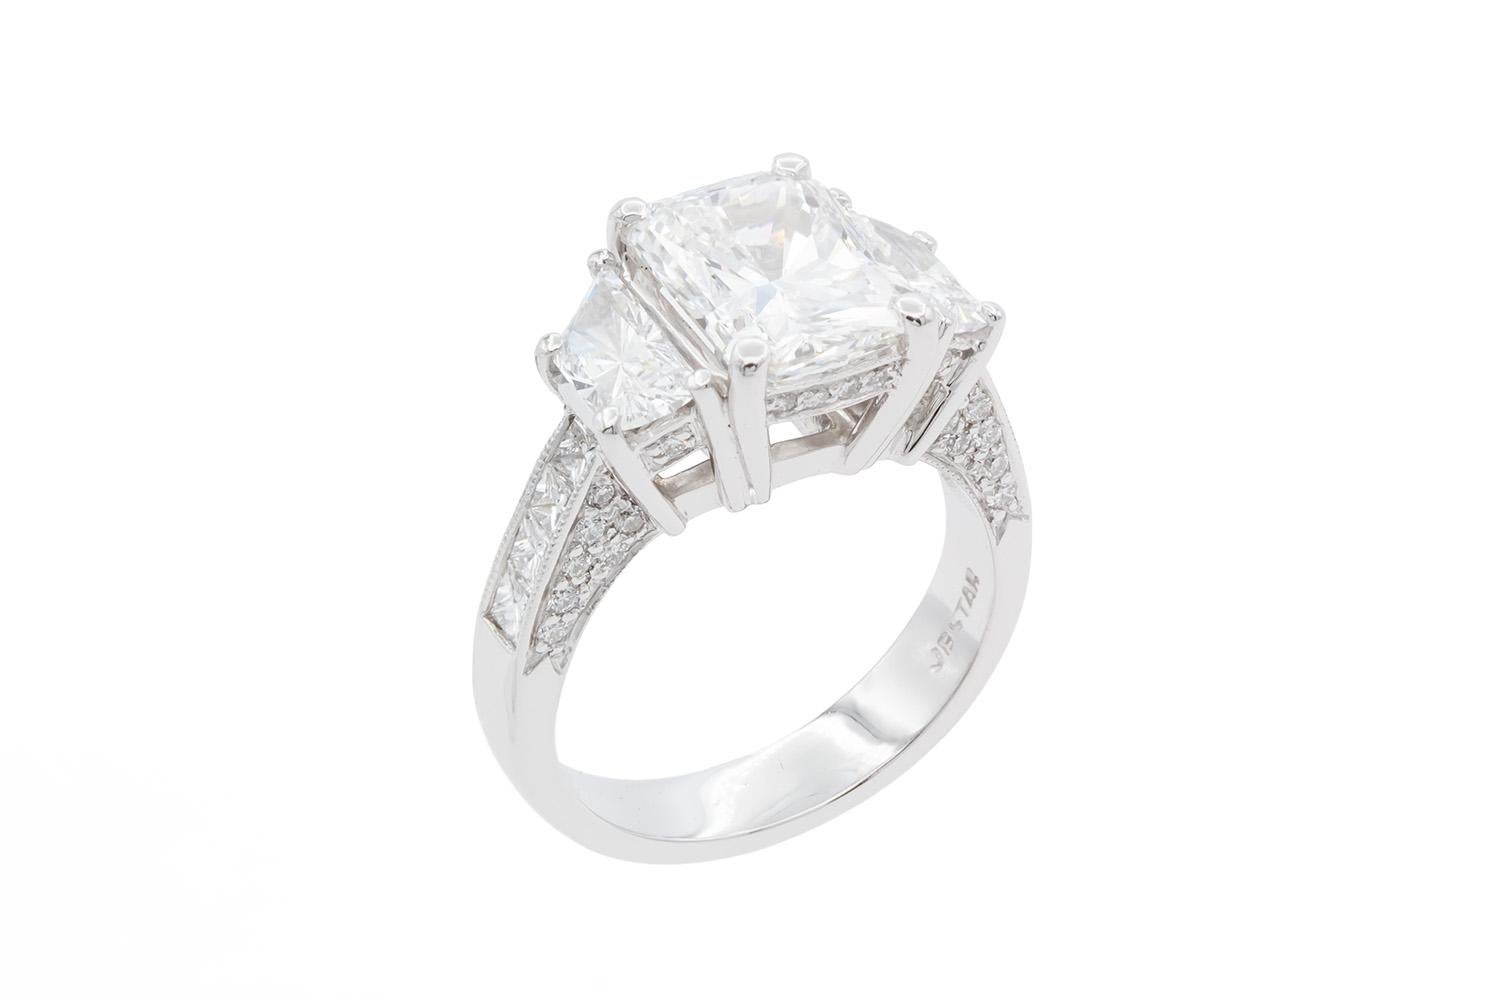 We are pleased to offer this JB Star Platinum & Radiant Cut Diamond Three Stone Engagement Ring. This stunningly beautiful ring features a GIA Certified 3.22ct E/SI1 Radiant cut diamond center stone set between two Trapezoid cut diamonds totaling